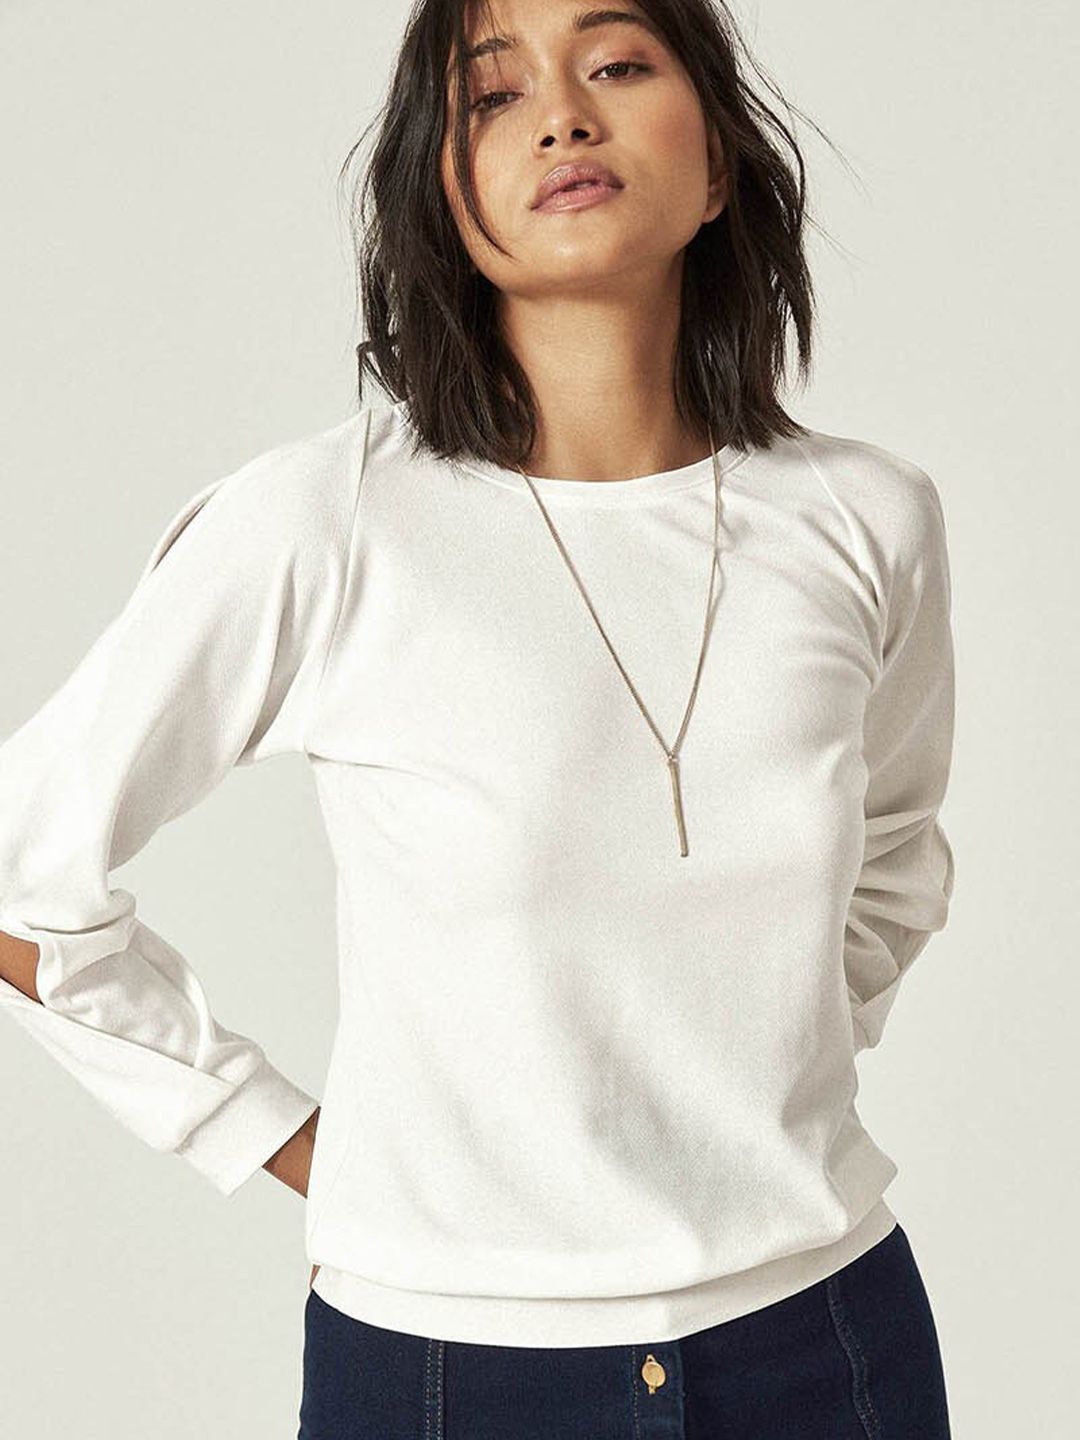 The Label Life Women White Textured Knit Top Price in India